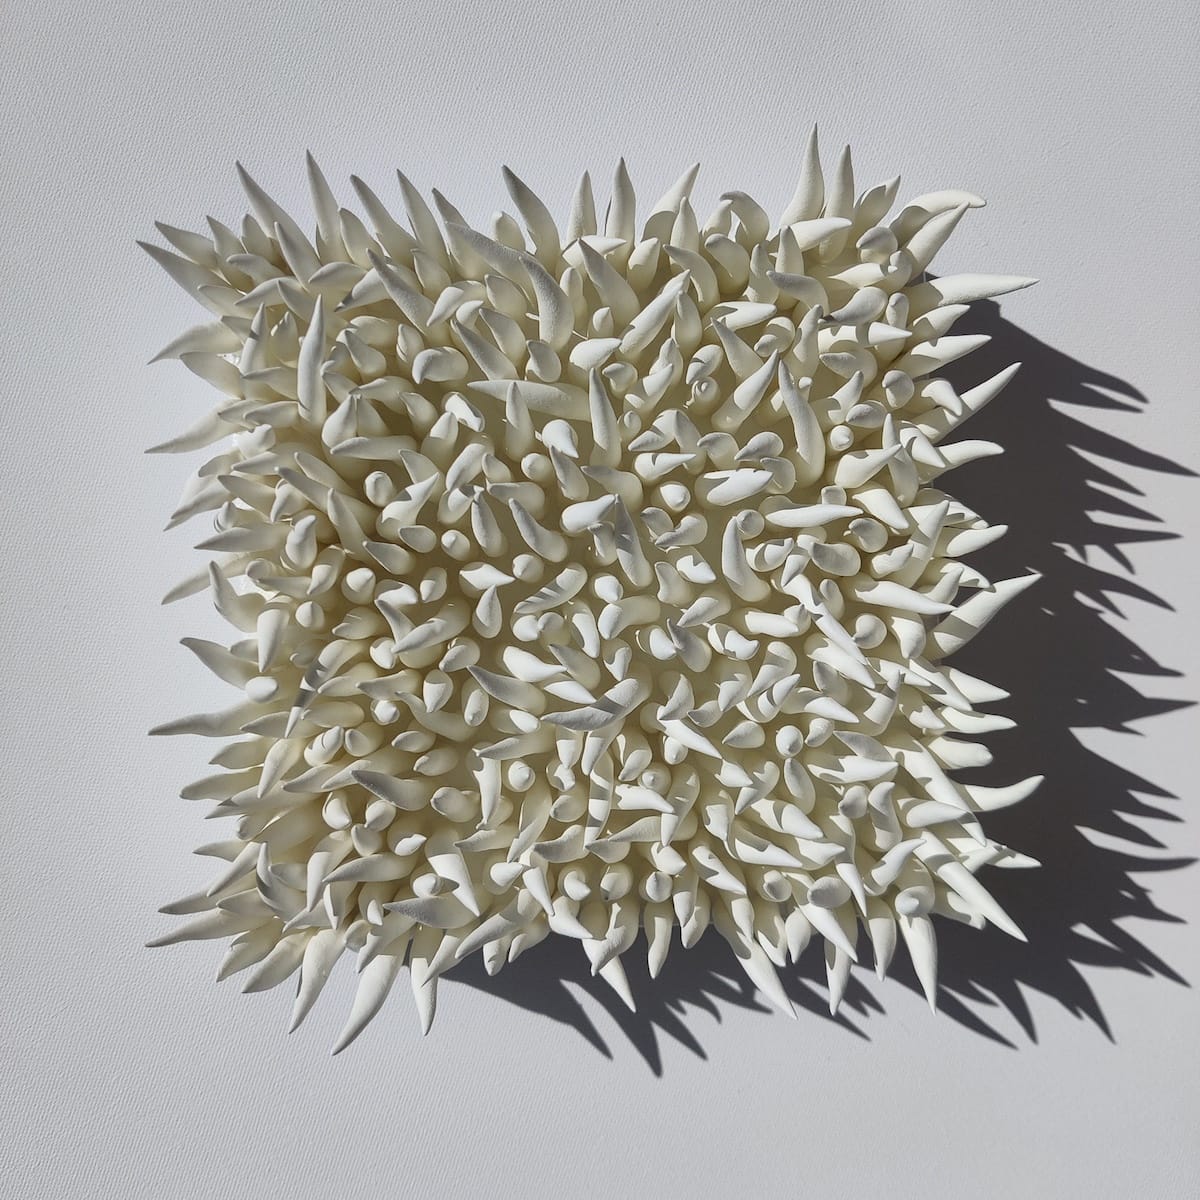 a spiny clay sculpture on a wall